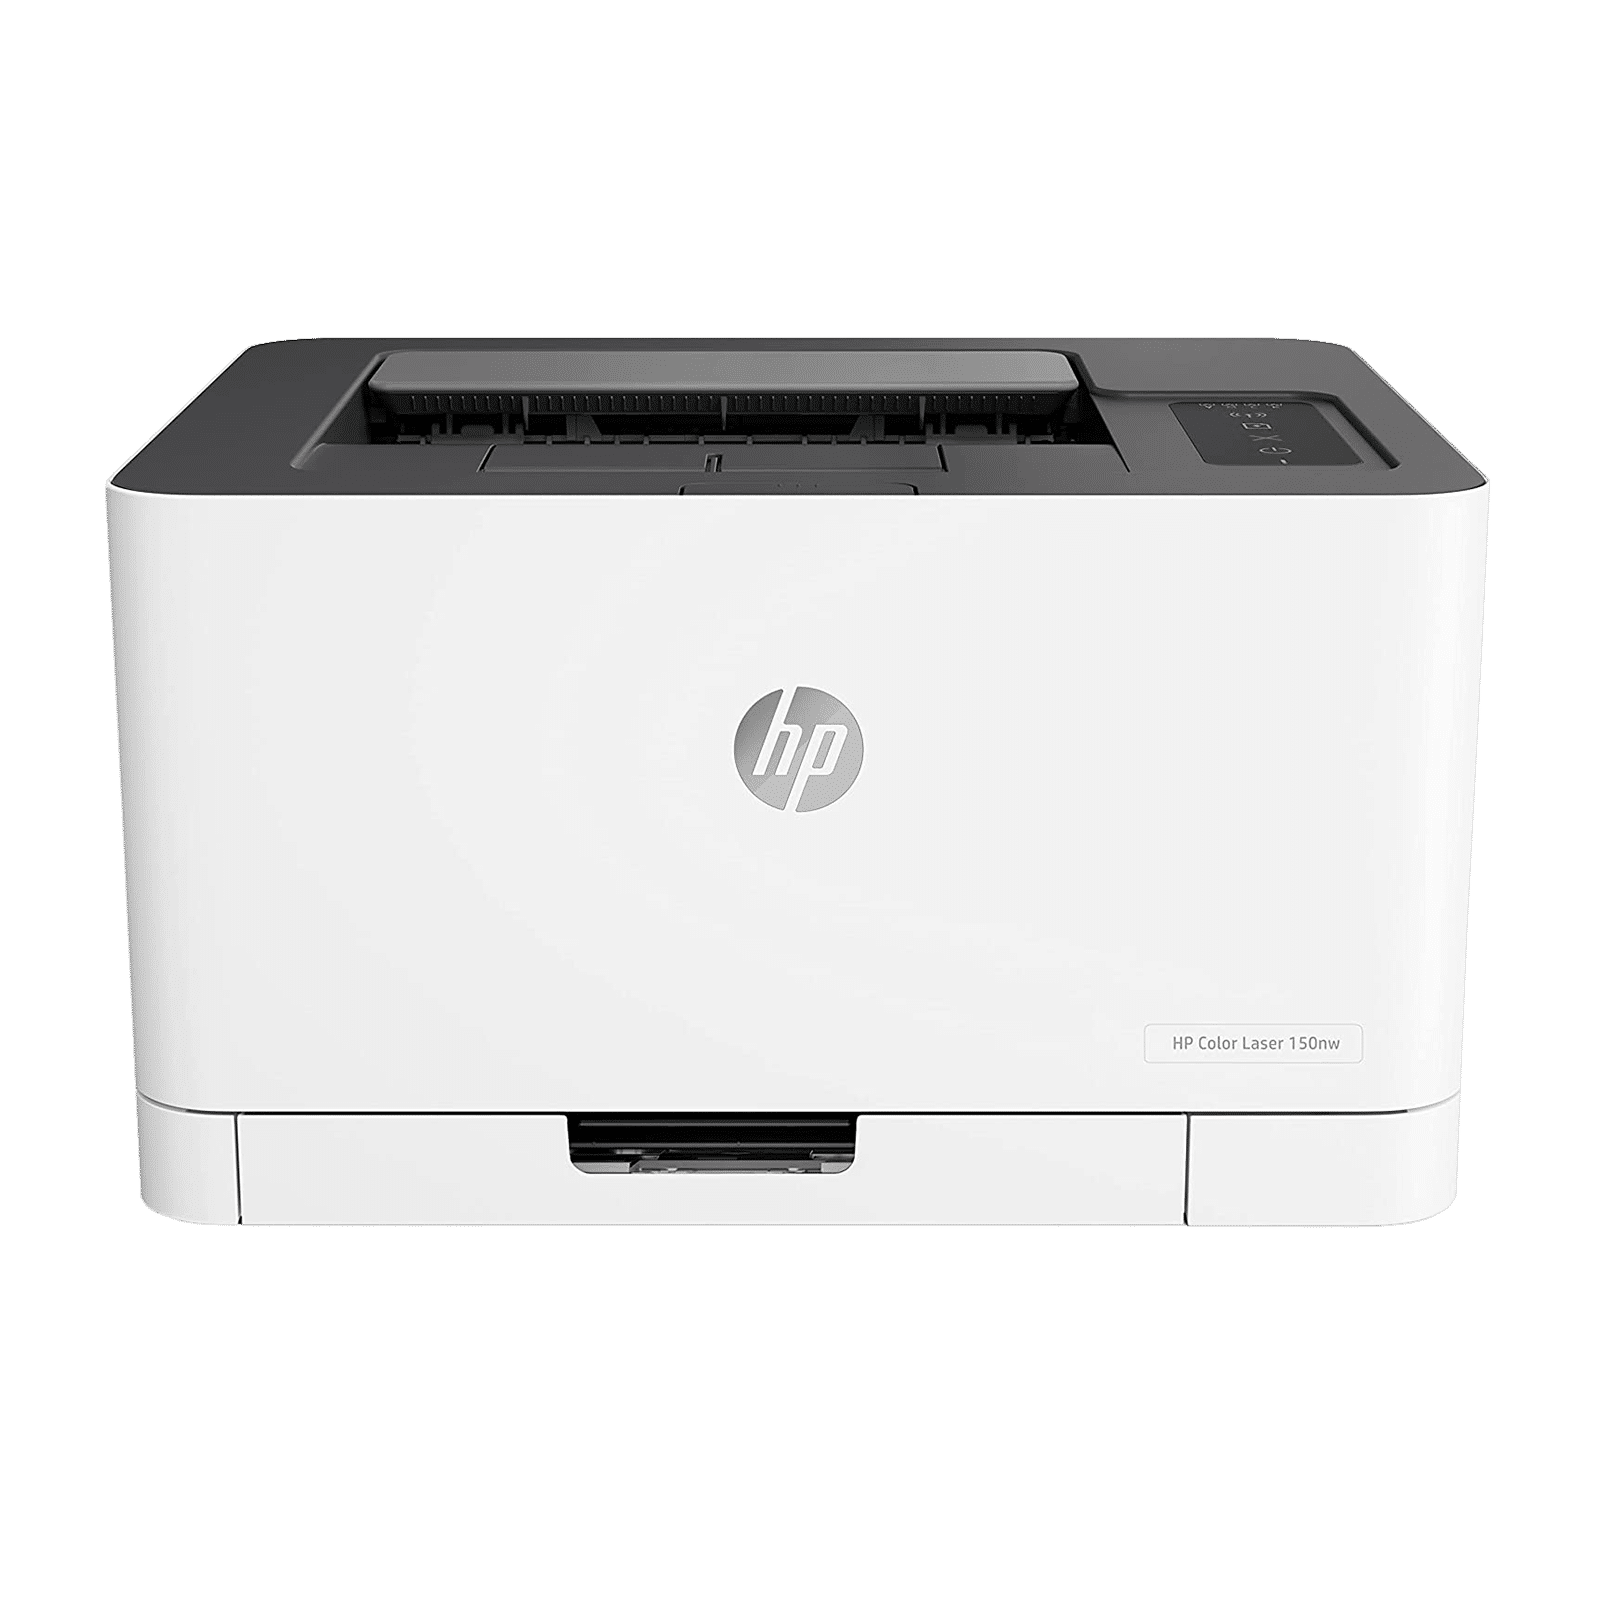 Buy HP Laser 150nw Wireless Color Printer (HP Auto-On/Auto-Off Technology,  4ZB95A, White) Online – Croma